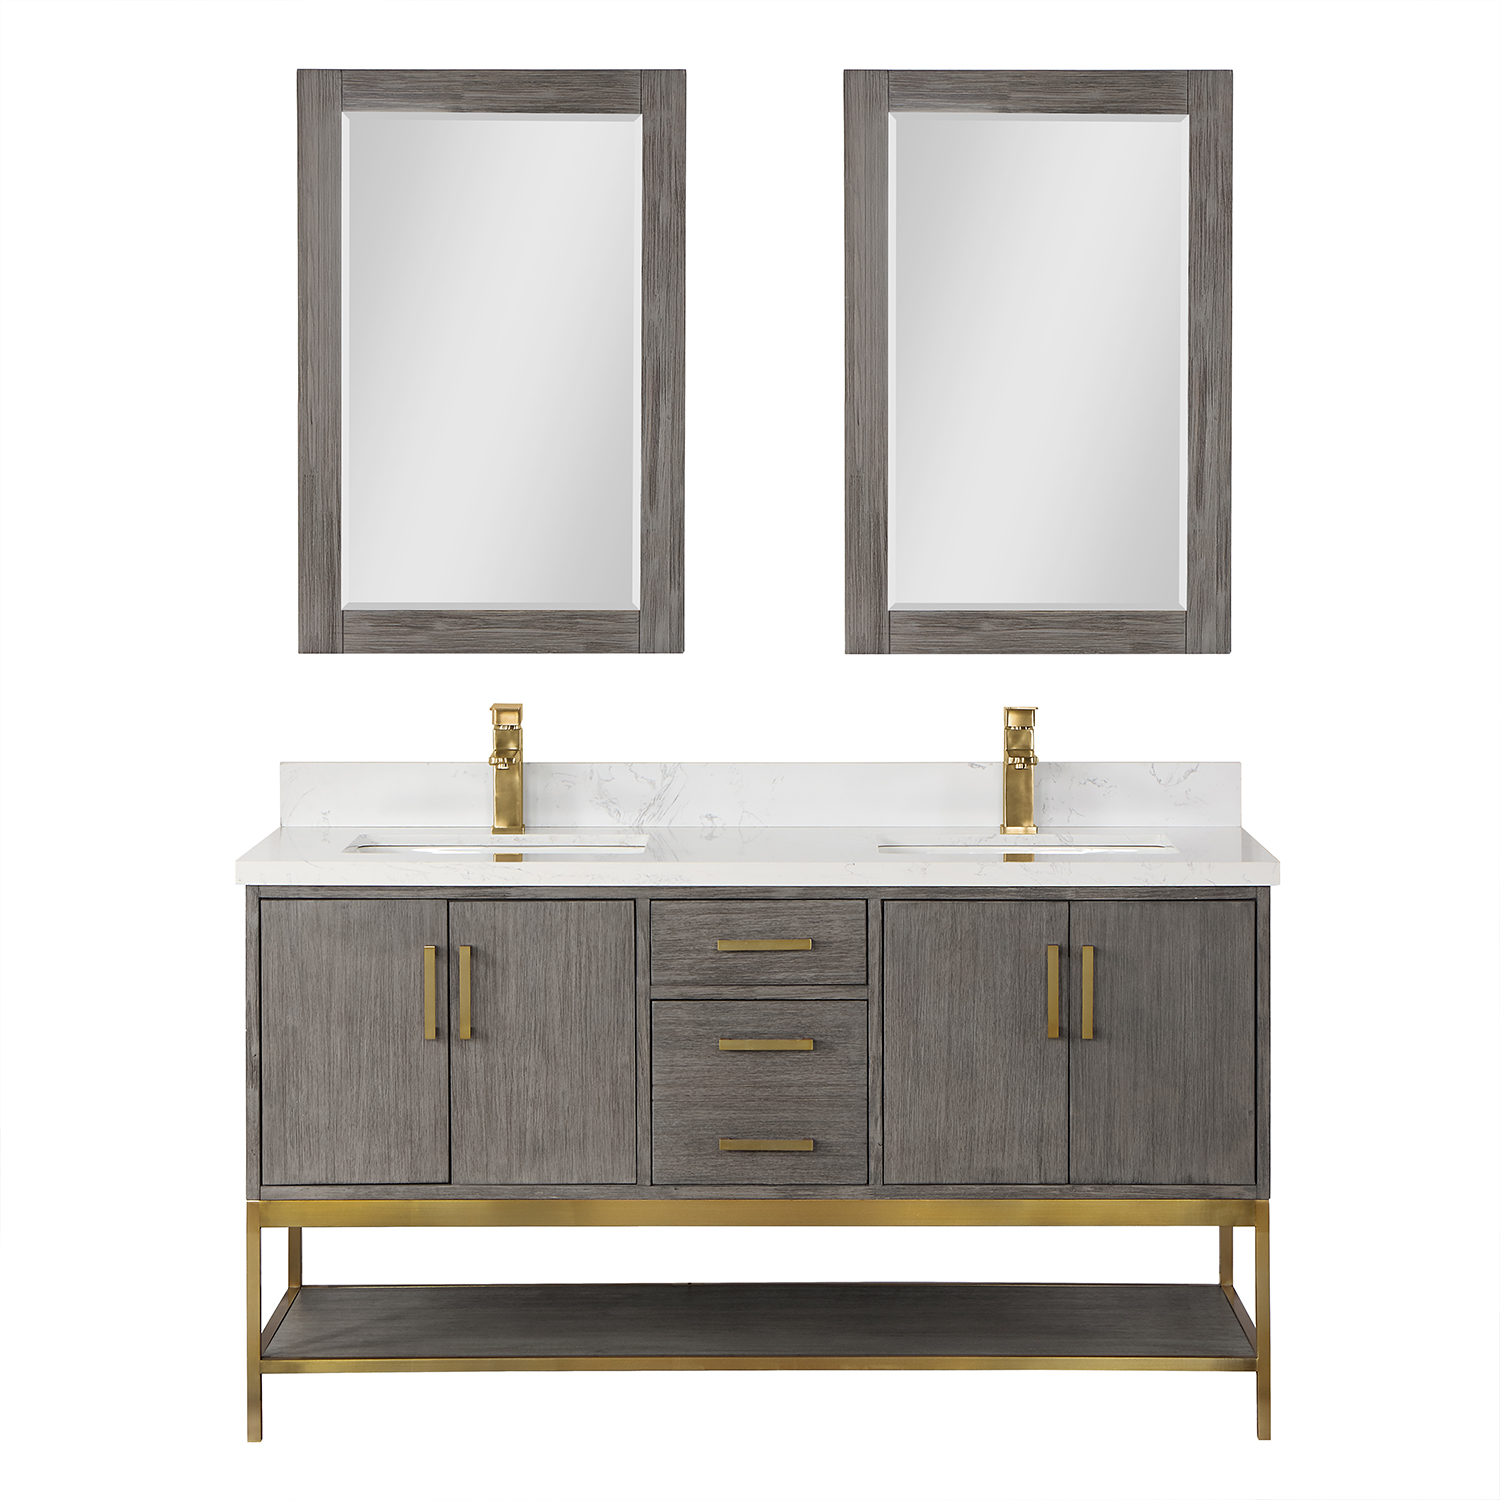 Issac Edwards Collection 60" Double Bathroom Vanity Set in Classical Grey with Grain White Composite Stone Countertop without Mirror 